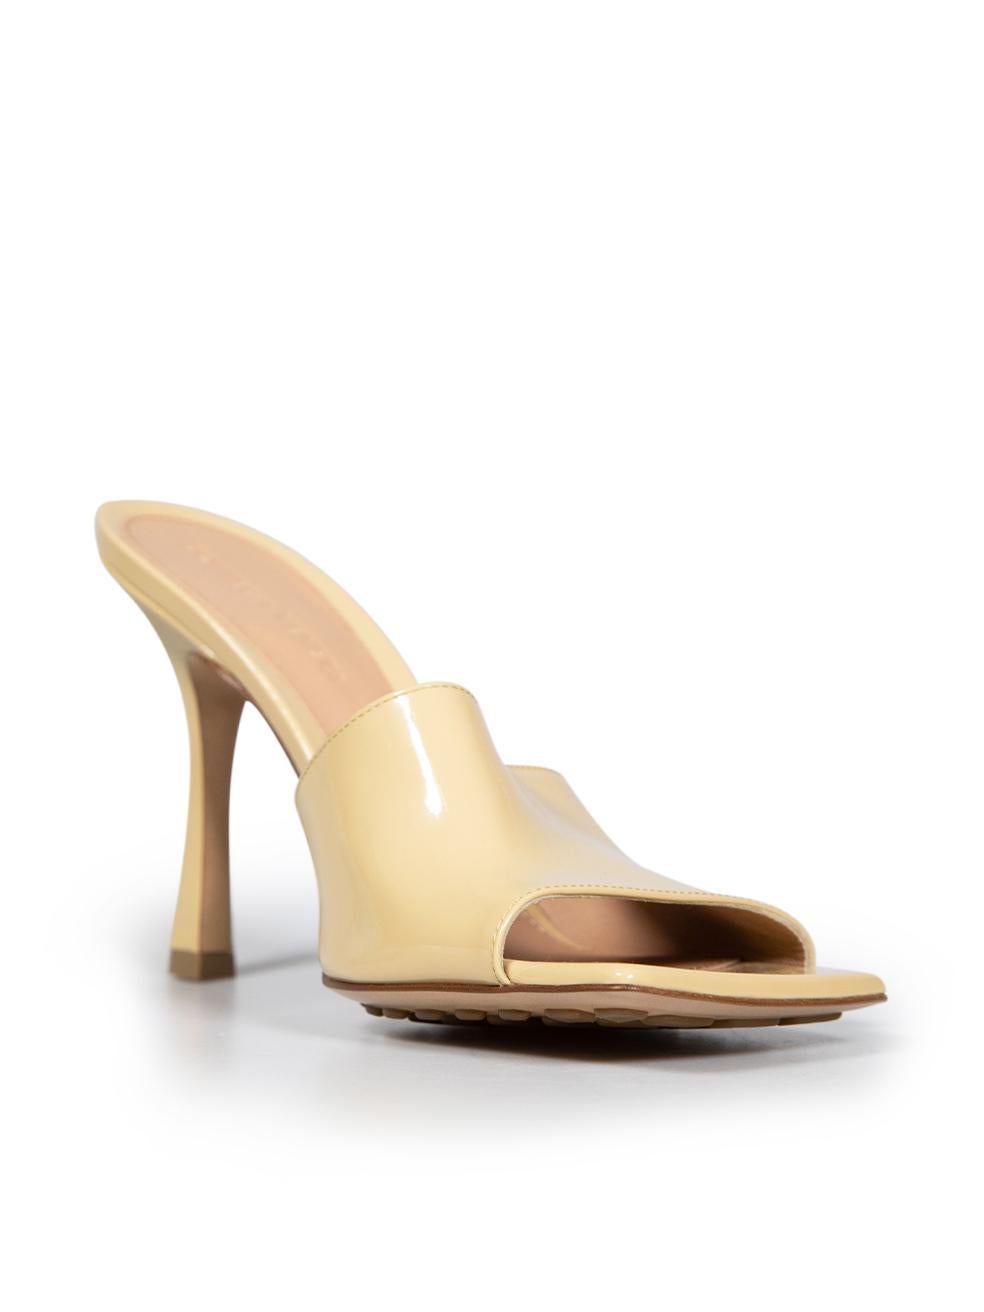 CONDITION is Never worn. No visible wear to shoes is evident on this new Bottega Veneta designer resale item. These shoes come with original dust bag.
 
 Details
 Model: Stretch
 Beige
 Patent leather
 Mules
 Open toe
 High heeled
 
 
 Made in